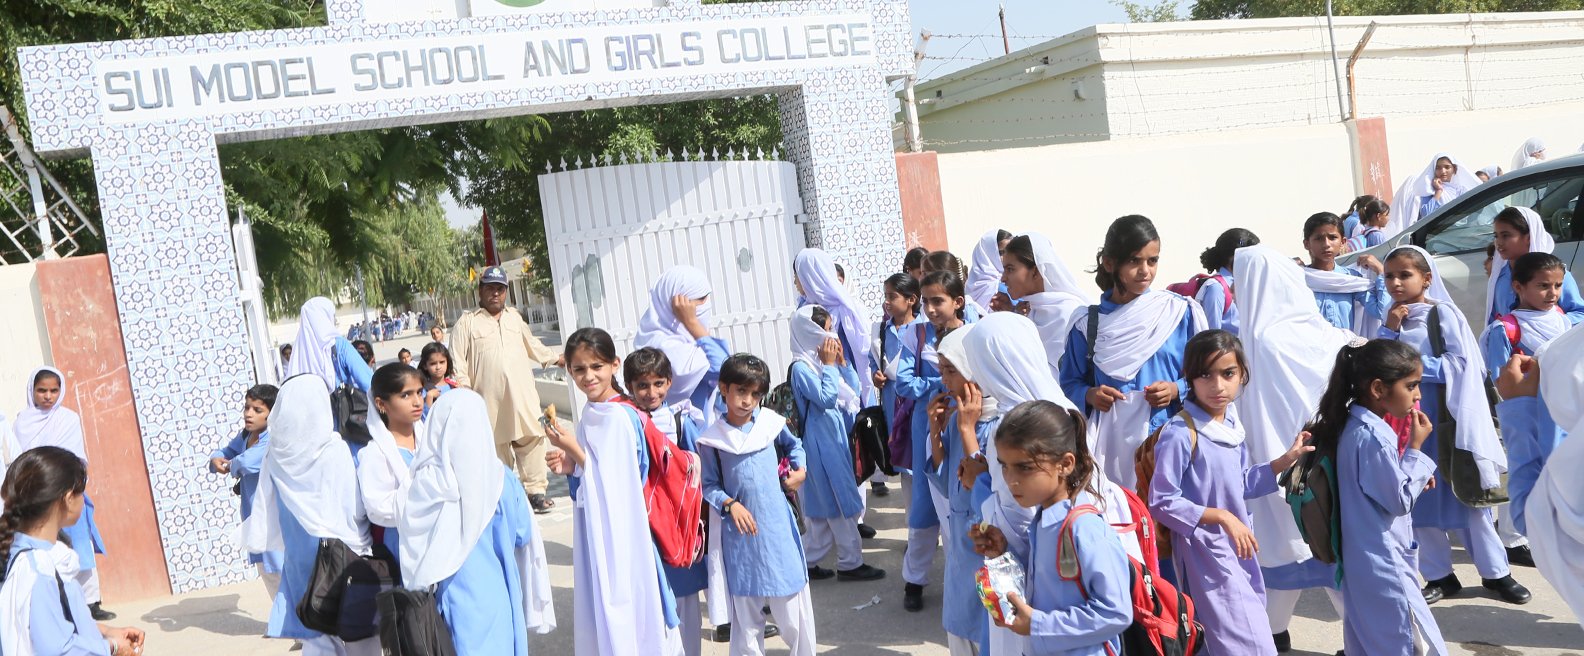 Students of Sui Model School and Girls’ College at home time. SMSGC has exclusive shift for girls students